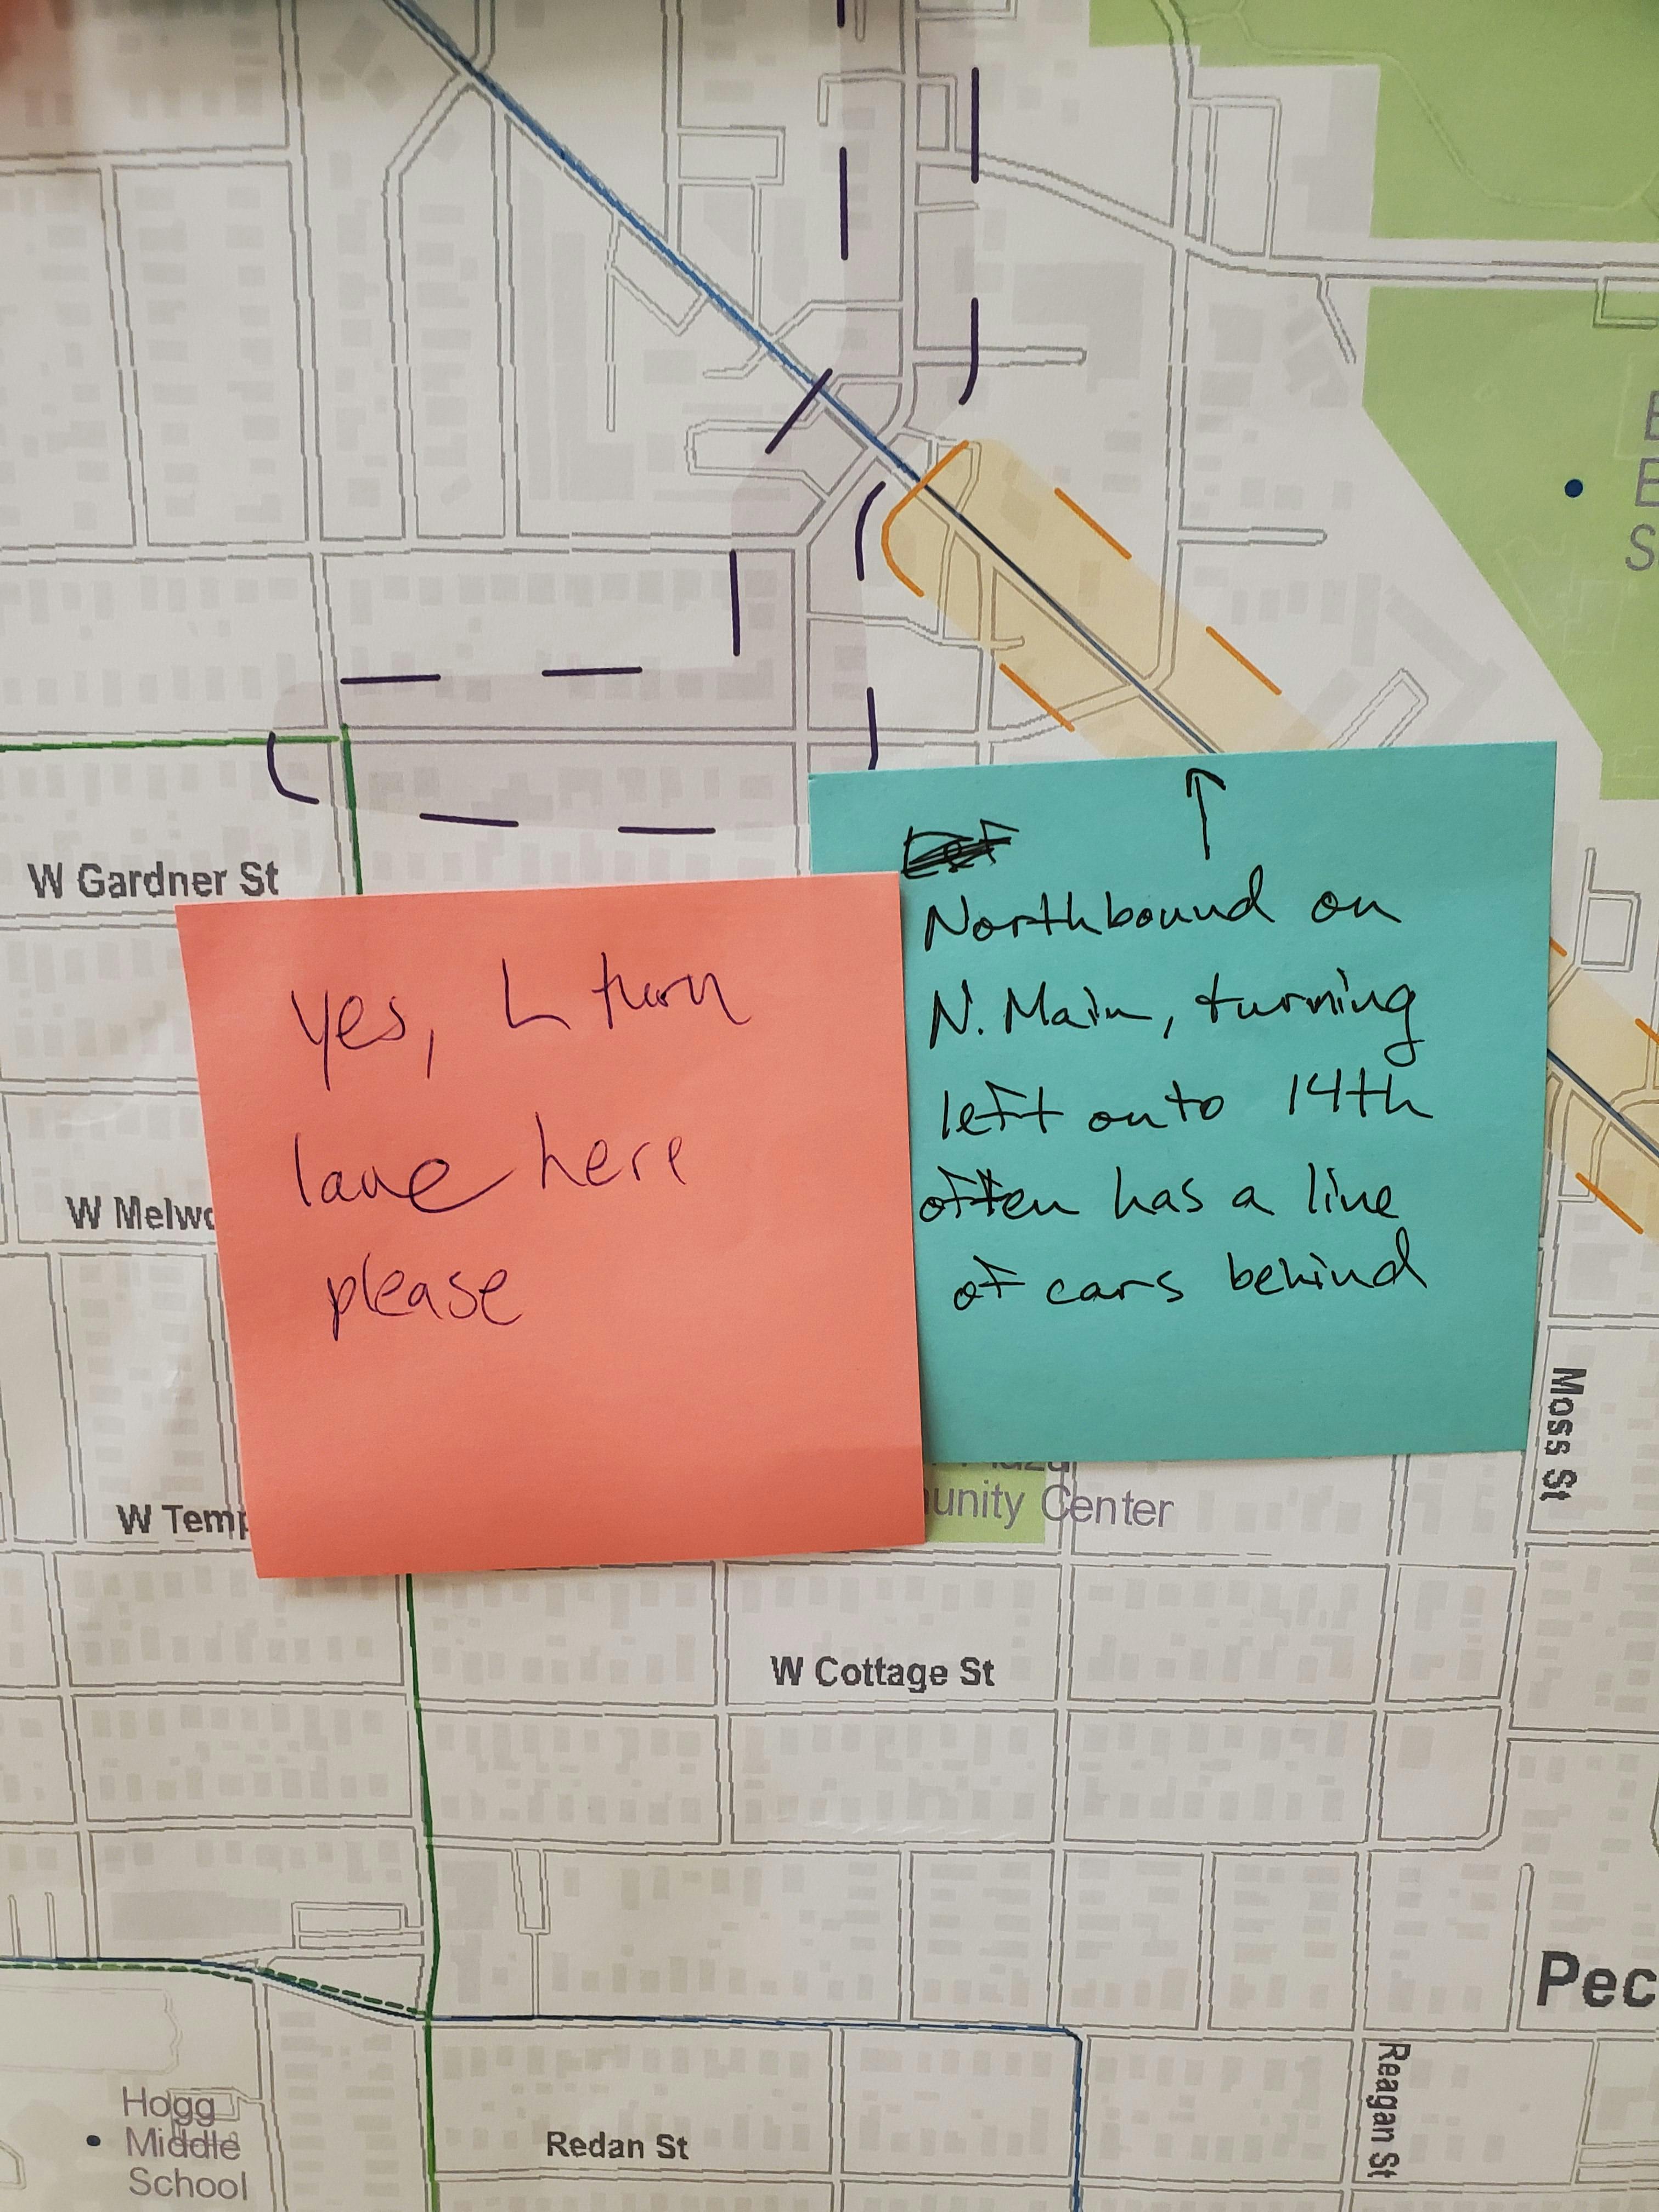 Comments on Proposed Bikeway and Safety Improvements Posterboard 2